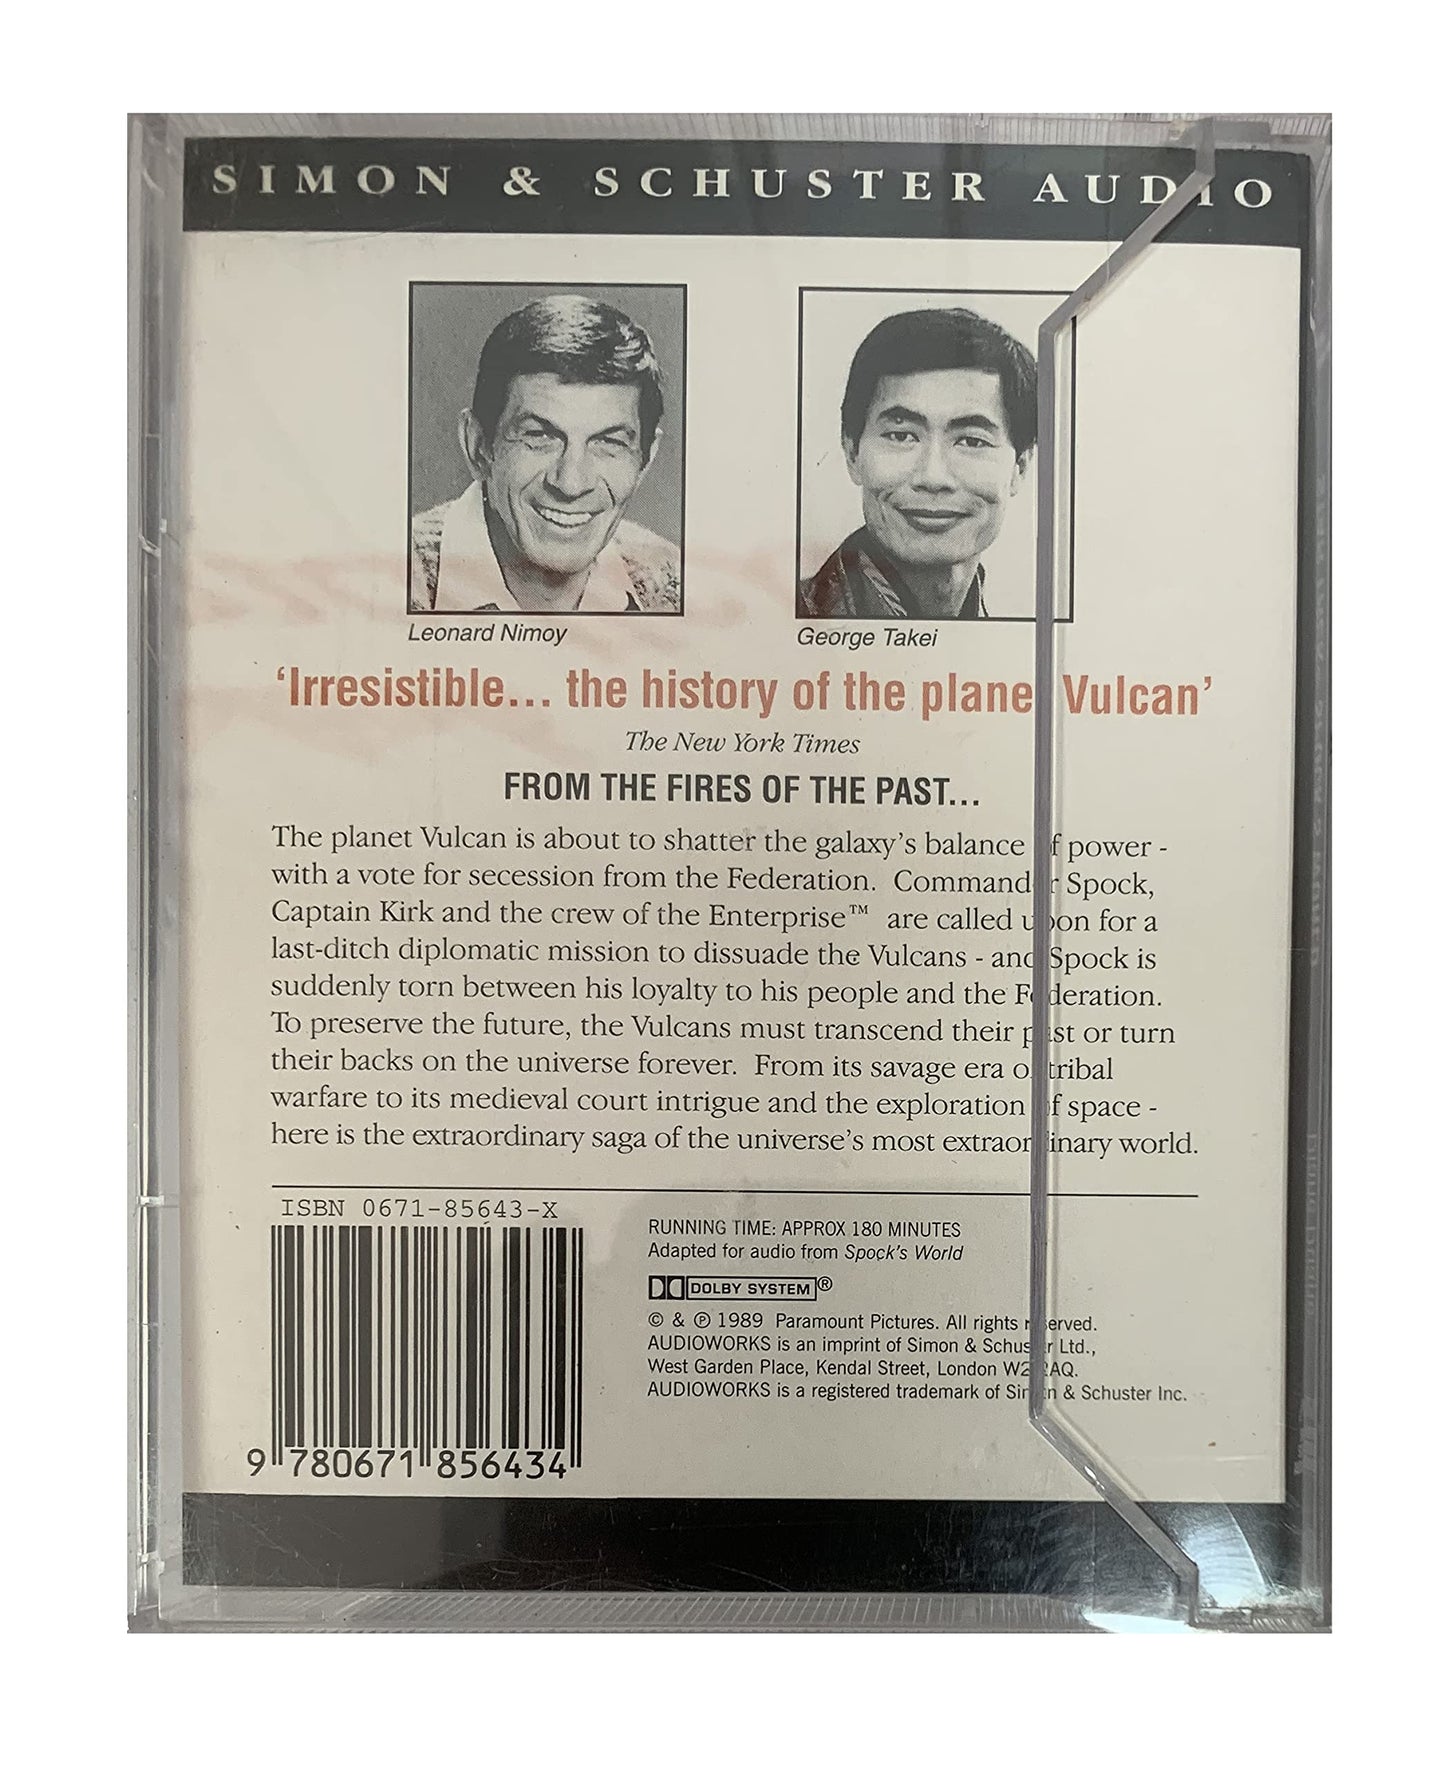 Vintage 1989 Star Trek : Spocks World - Simon & Schuster Double Audio Cassette Read By Leonard Nimoy and George Takei - Shop Stock Room Find